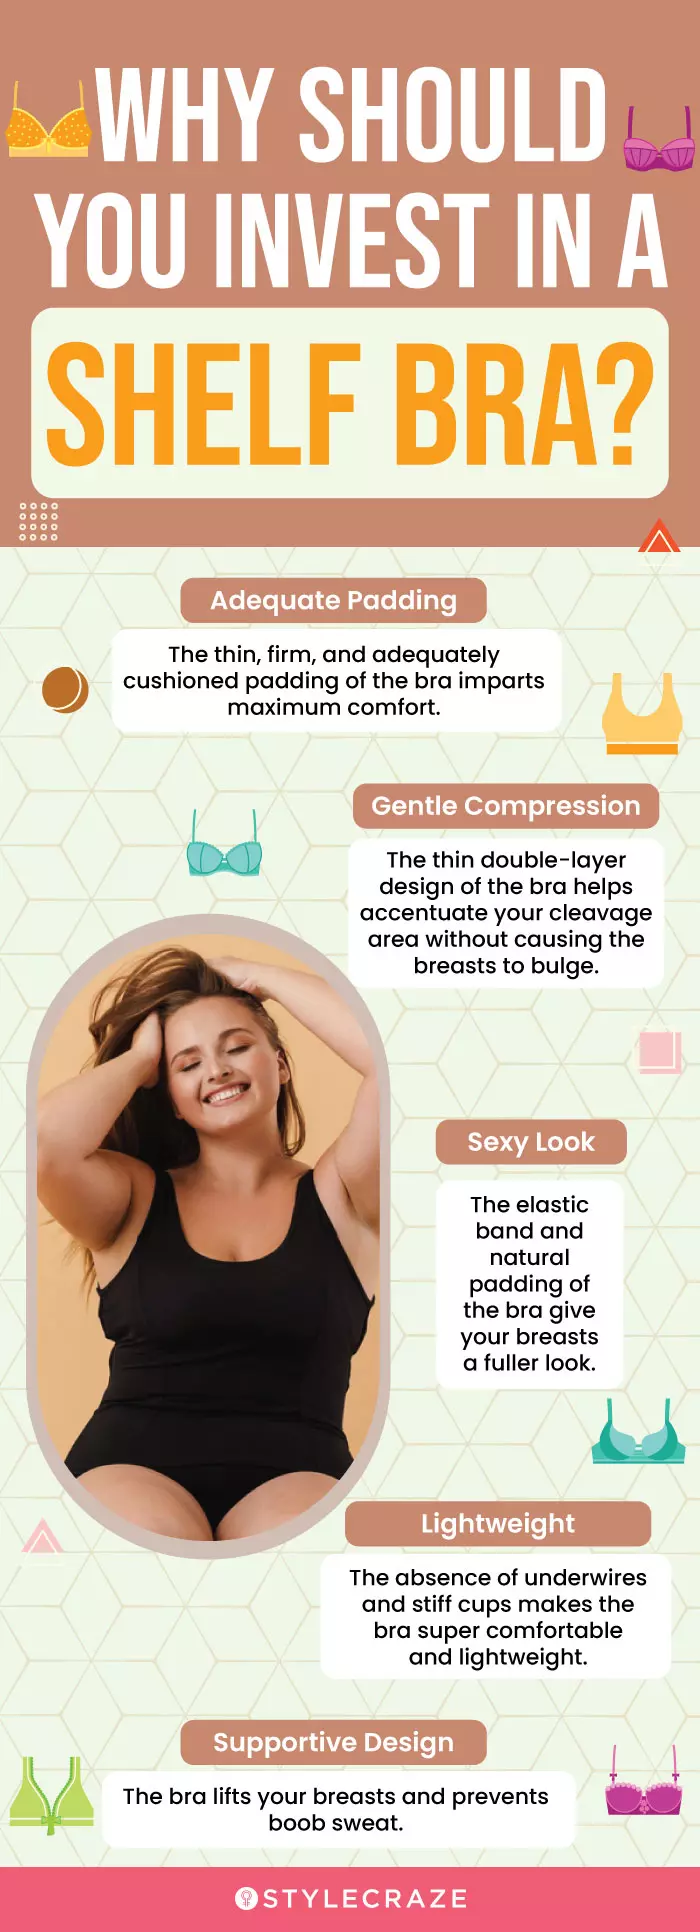 Why Should You Invest In A Shelf Bra (infographic)